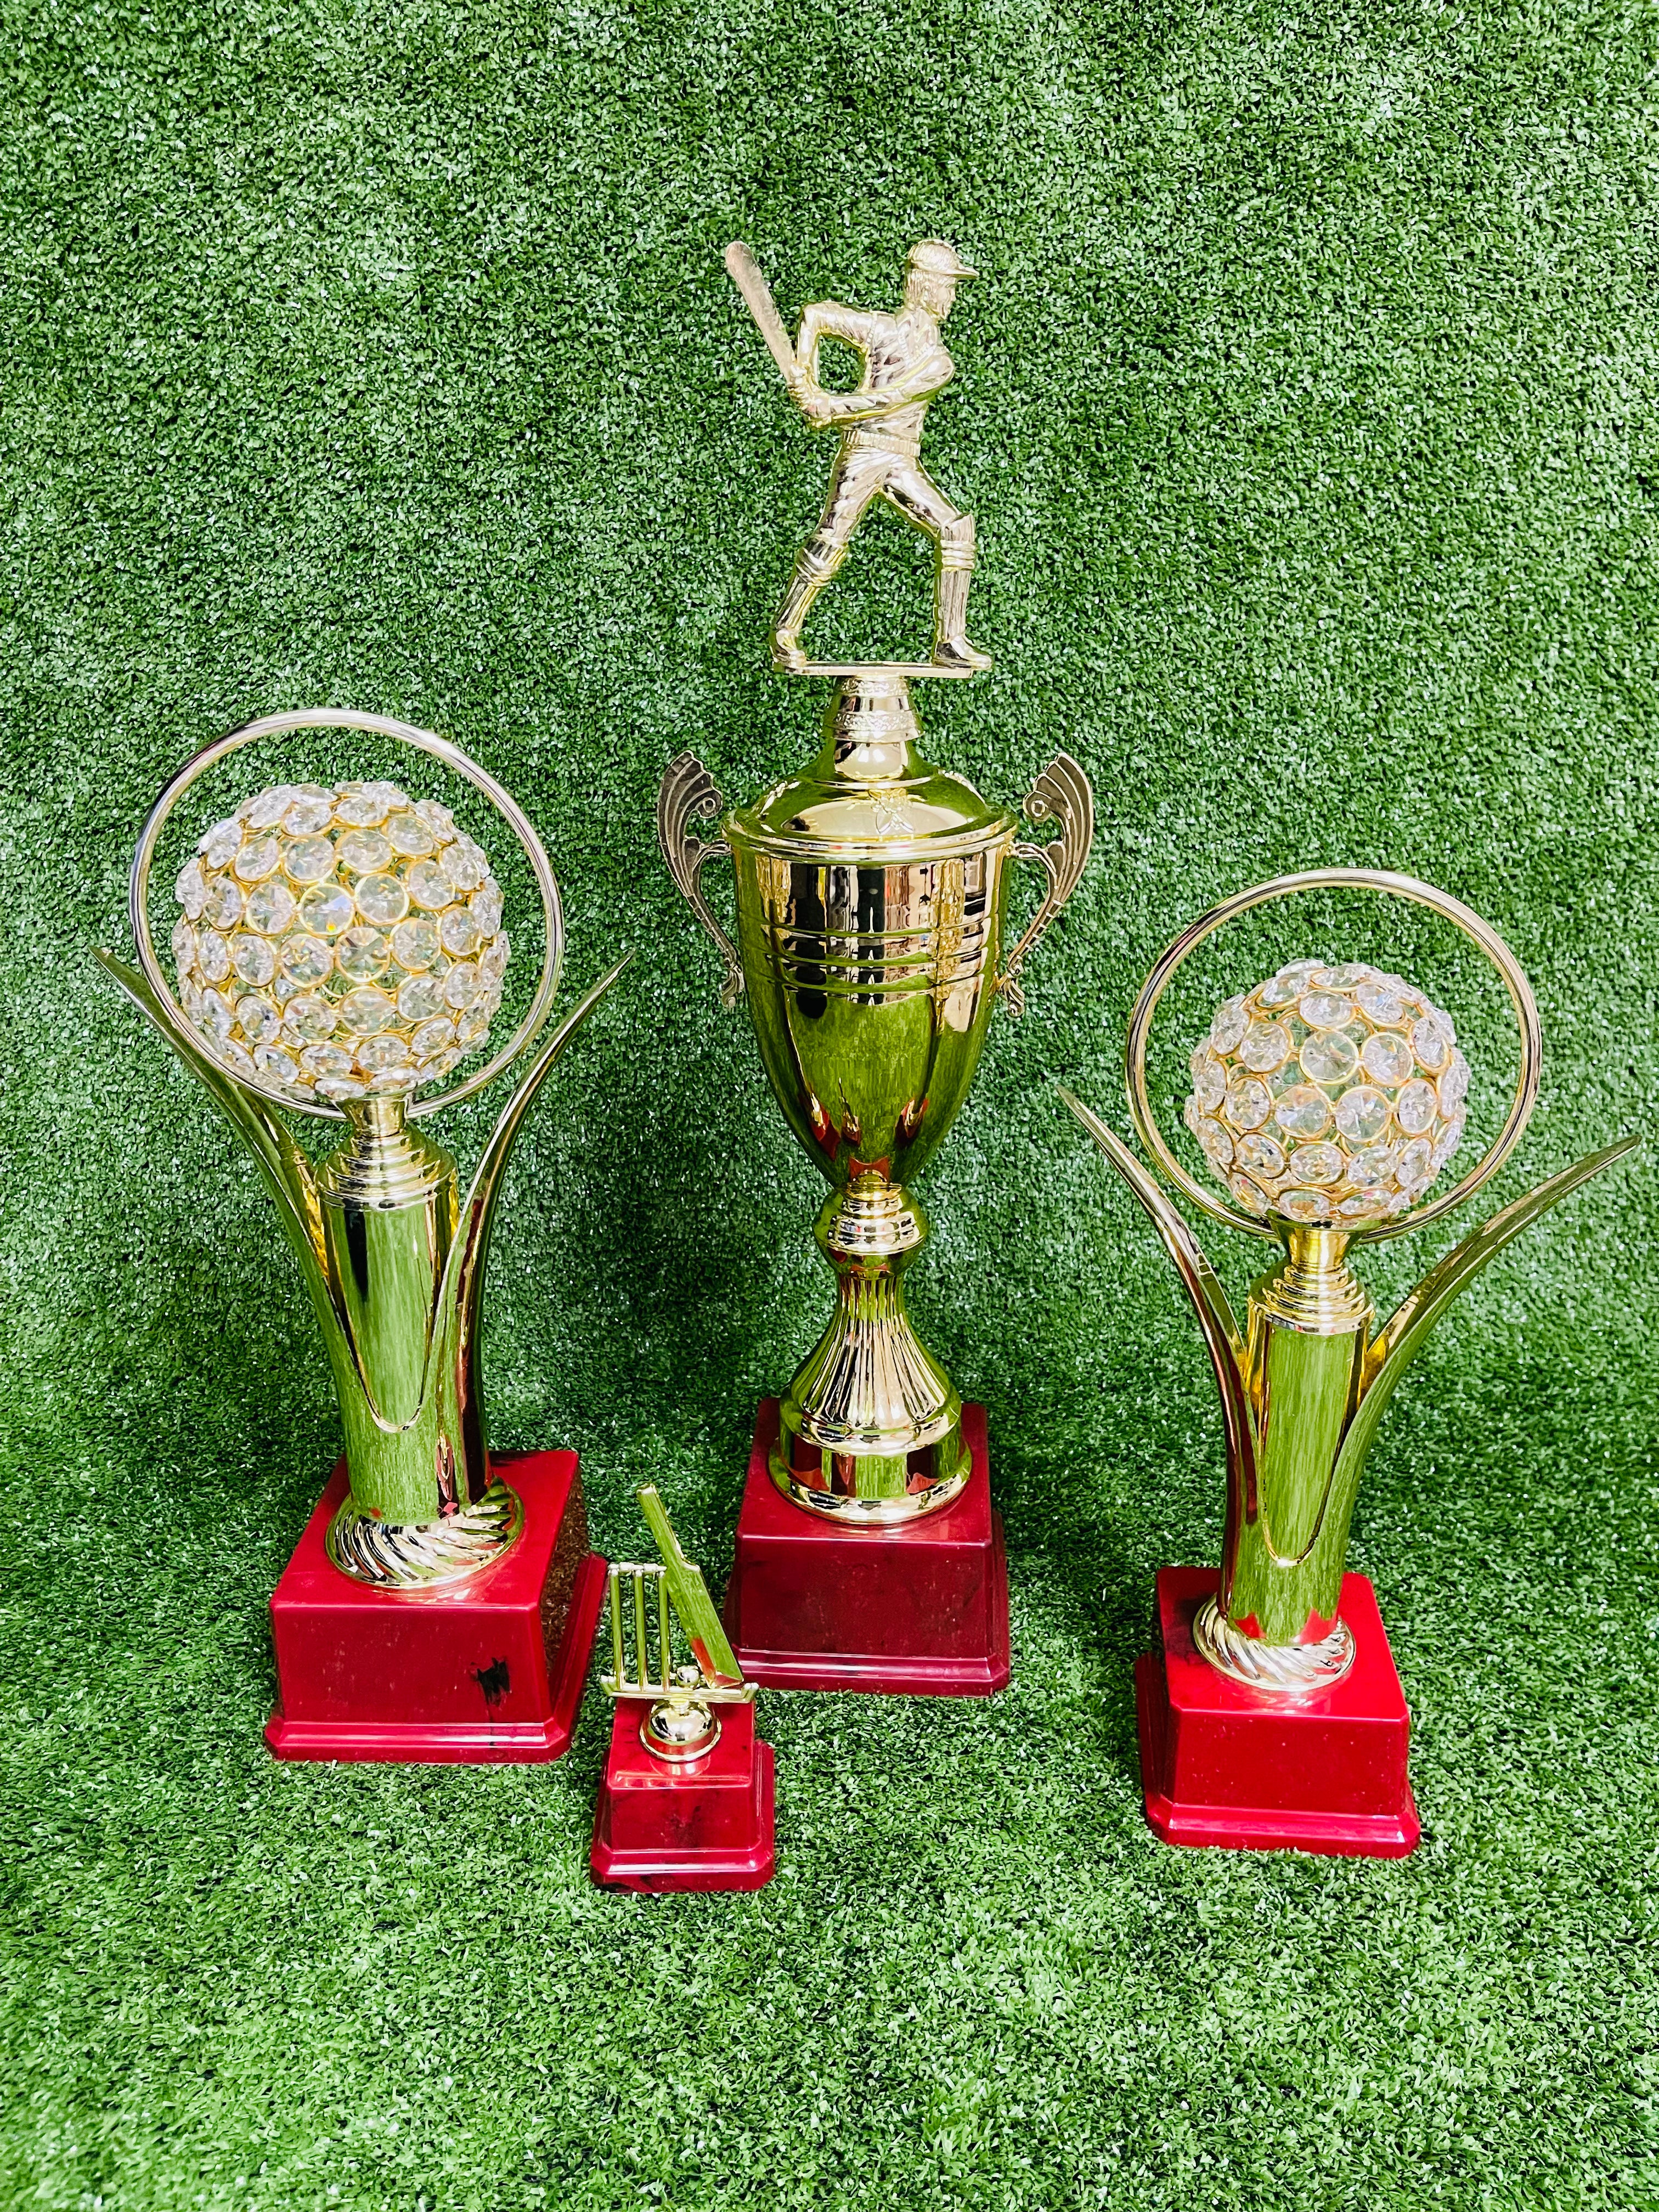 Raydn Cricket Trophy With Globe (13 inches height)